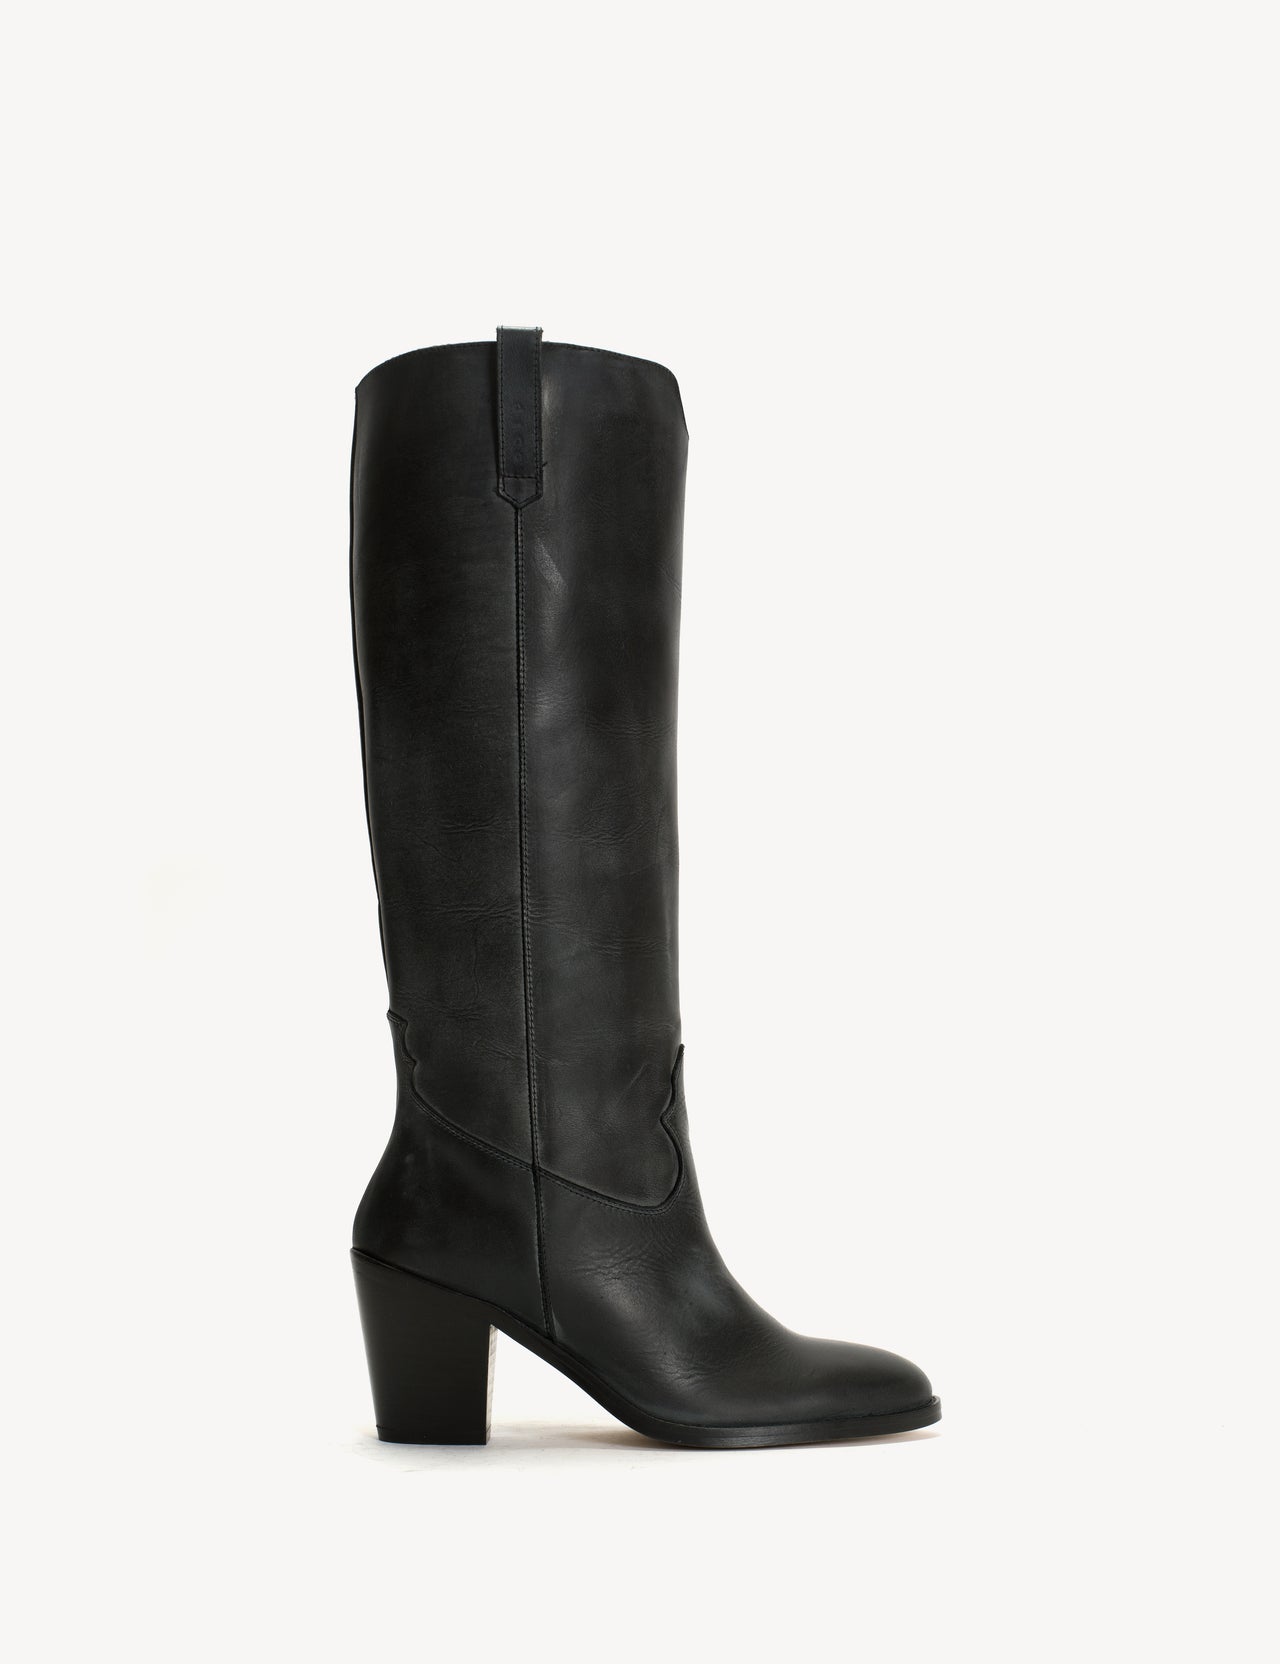 Janie Boot In Charcoal Black Escovado Leather